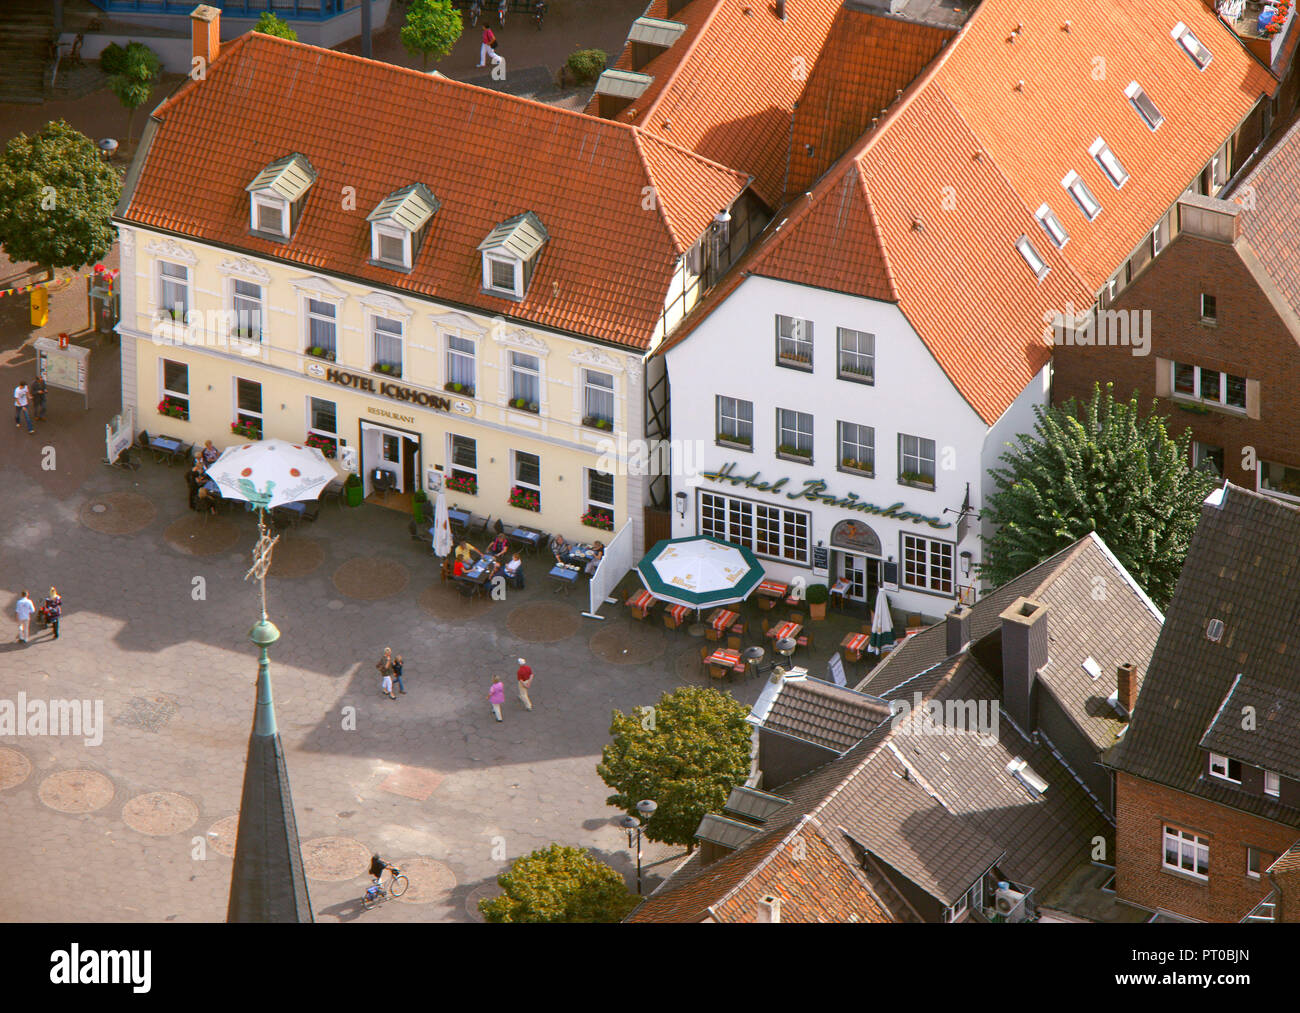 Aerial view, town hall square with Hotel Ickhorn on the left and Hotel Baumhove, Werne, Ruhr area, North Rhine-Westphalia, Germany, Europe Stock Photo